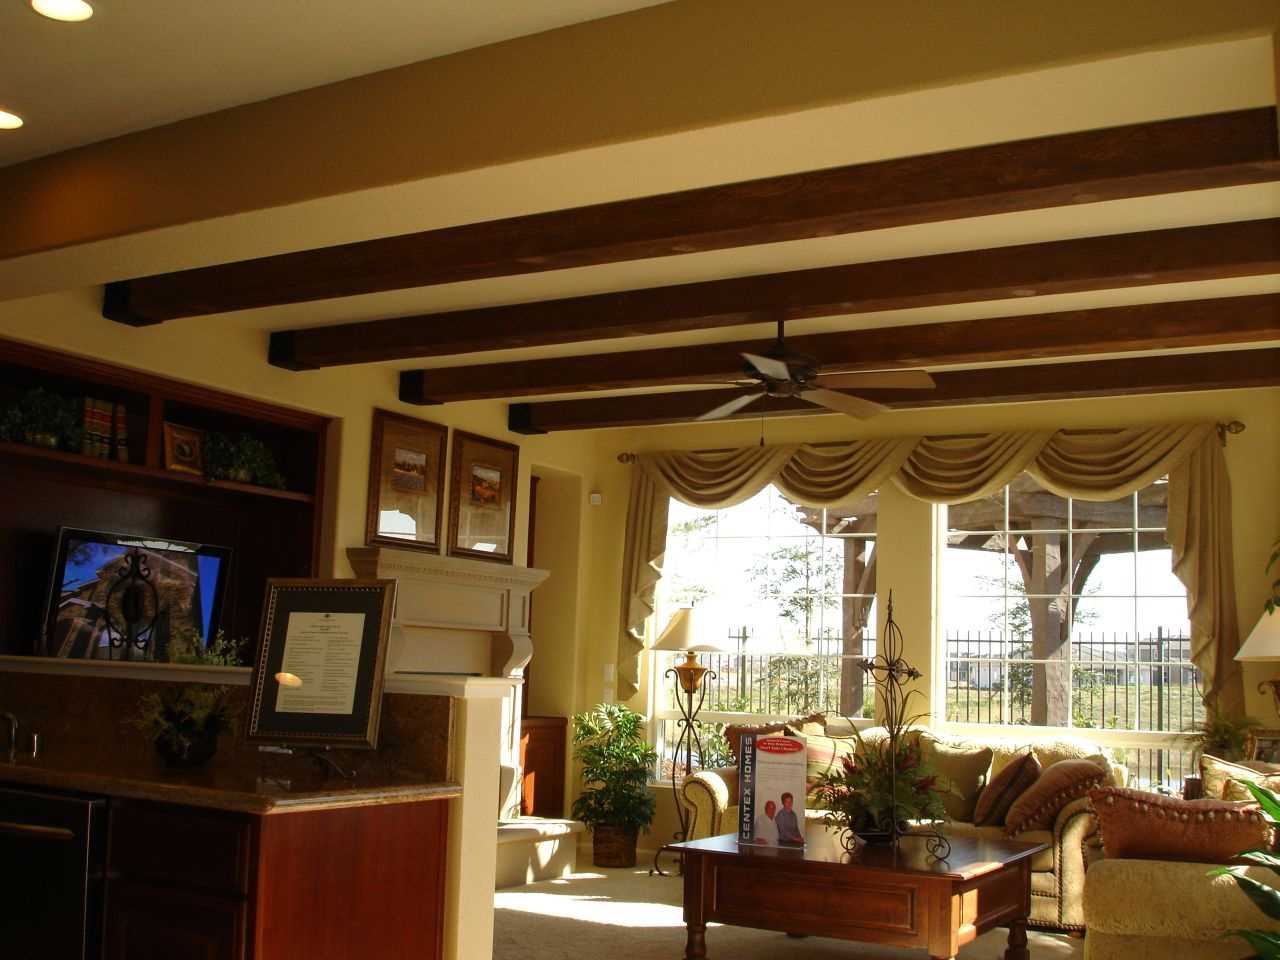 variant of the bright decor of the apartment with decorative beams